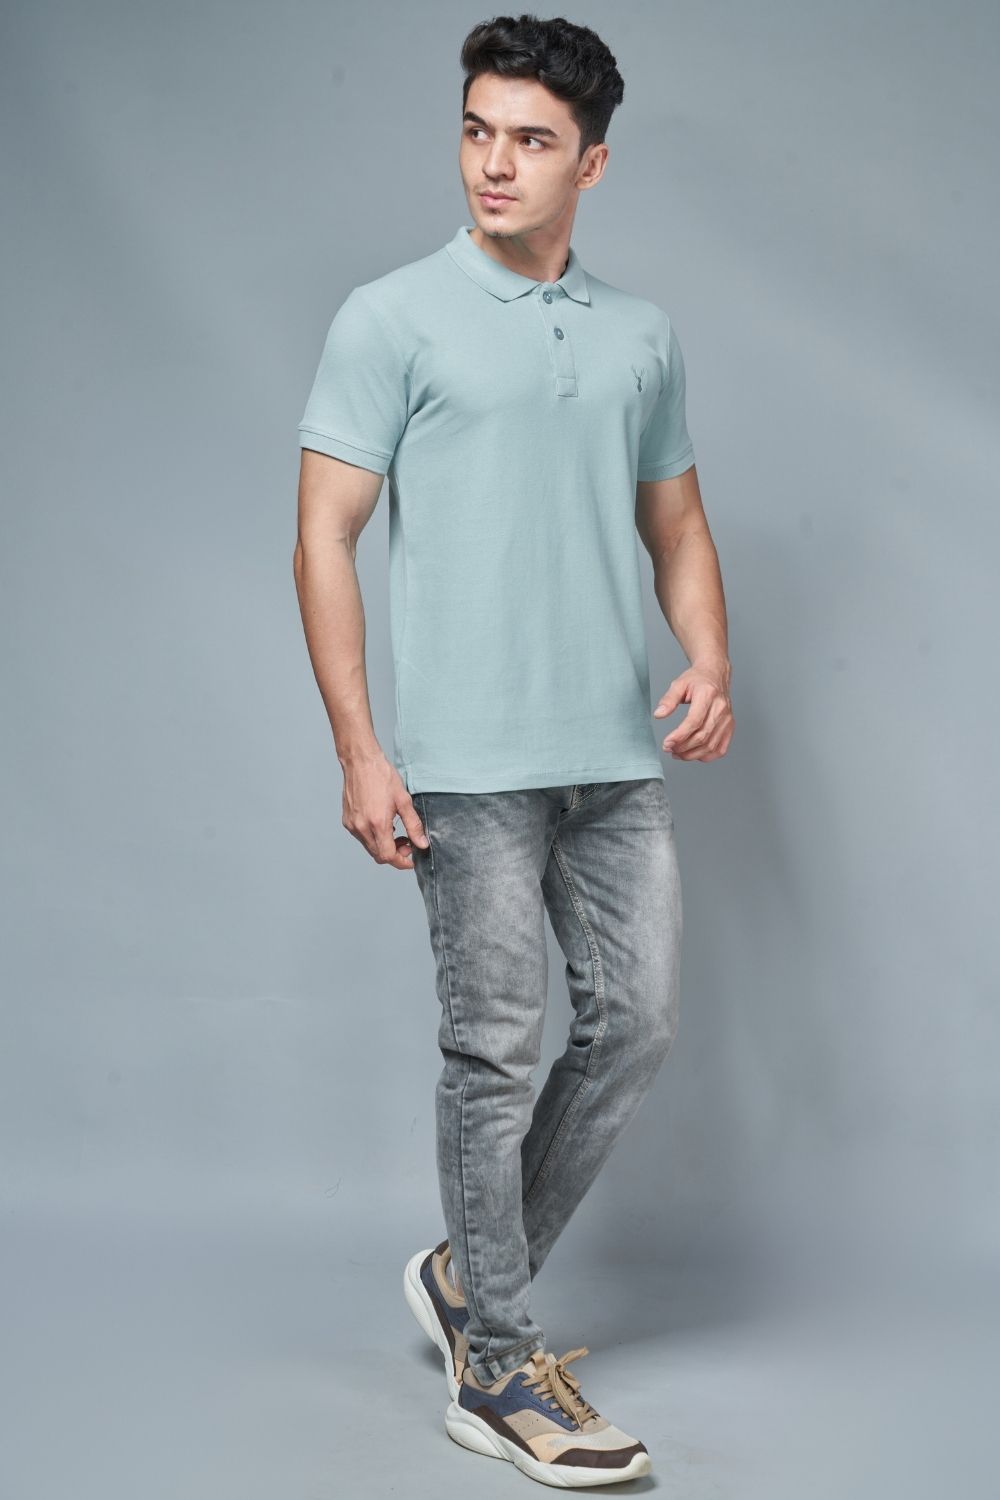 Sky light colored, identity Polo T-shirts for men with collar and half sleeves, full view.